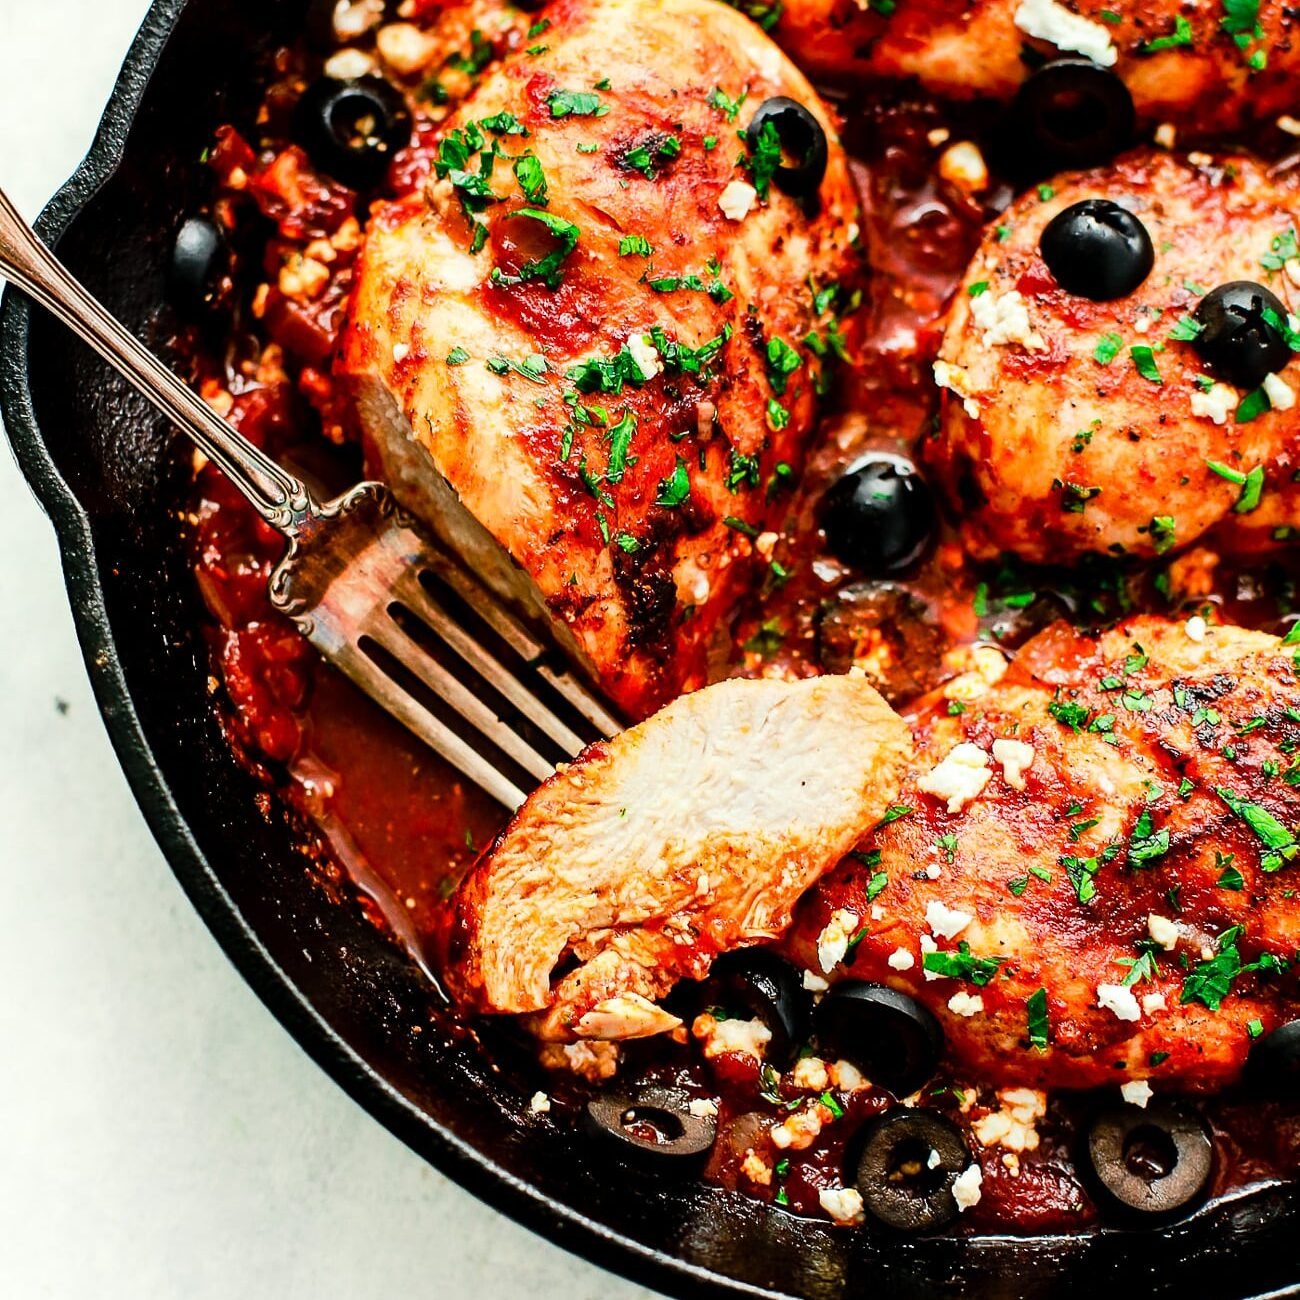 Overhead view of a cast iron skillet containing Mediterranean Chicken breast. One of my favorite date night dinner ideas.